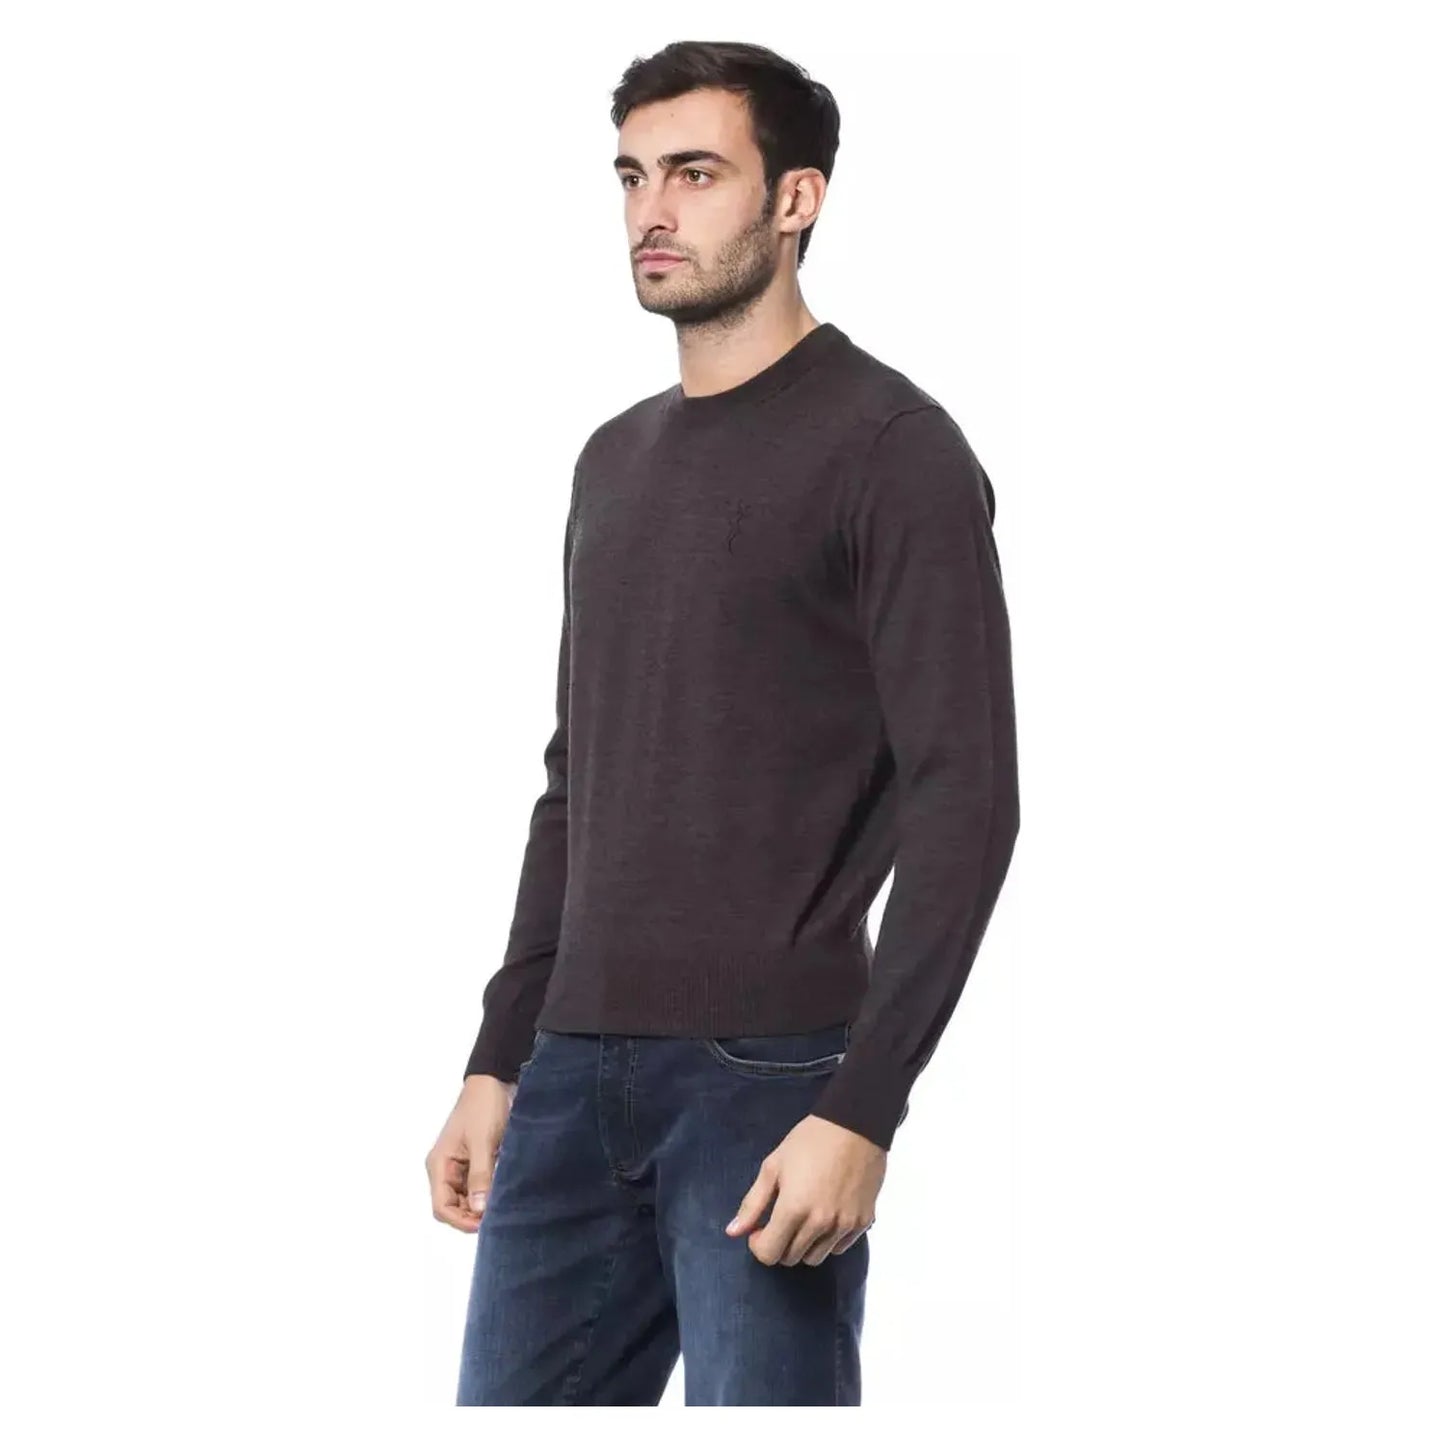 Billionaire Italian Couture Elegant Embroidered Merino Wool Sweater marr-brown-sweater-2 stock_product_image_10482_915390502-25-594a5491-816.webp